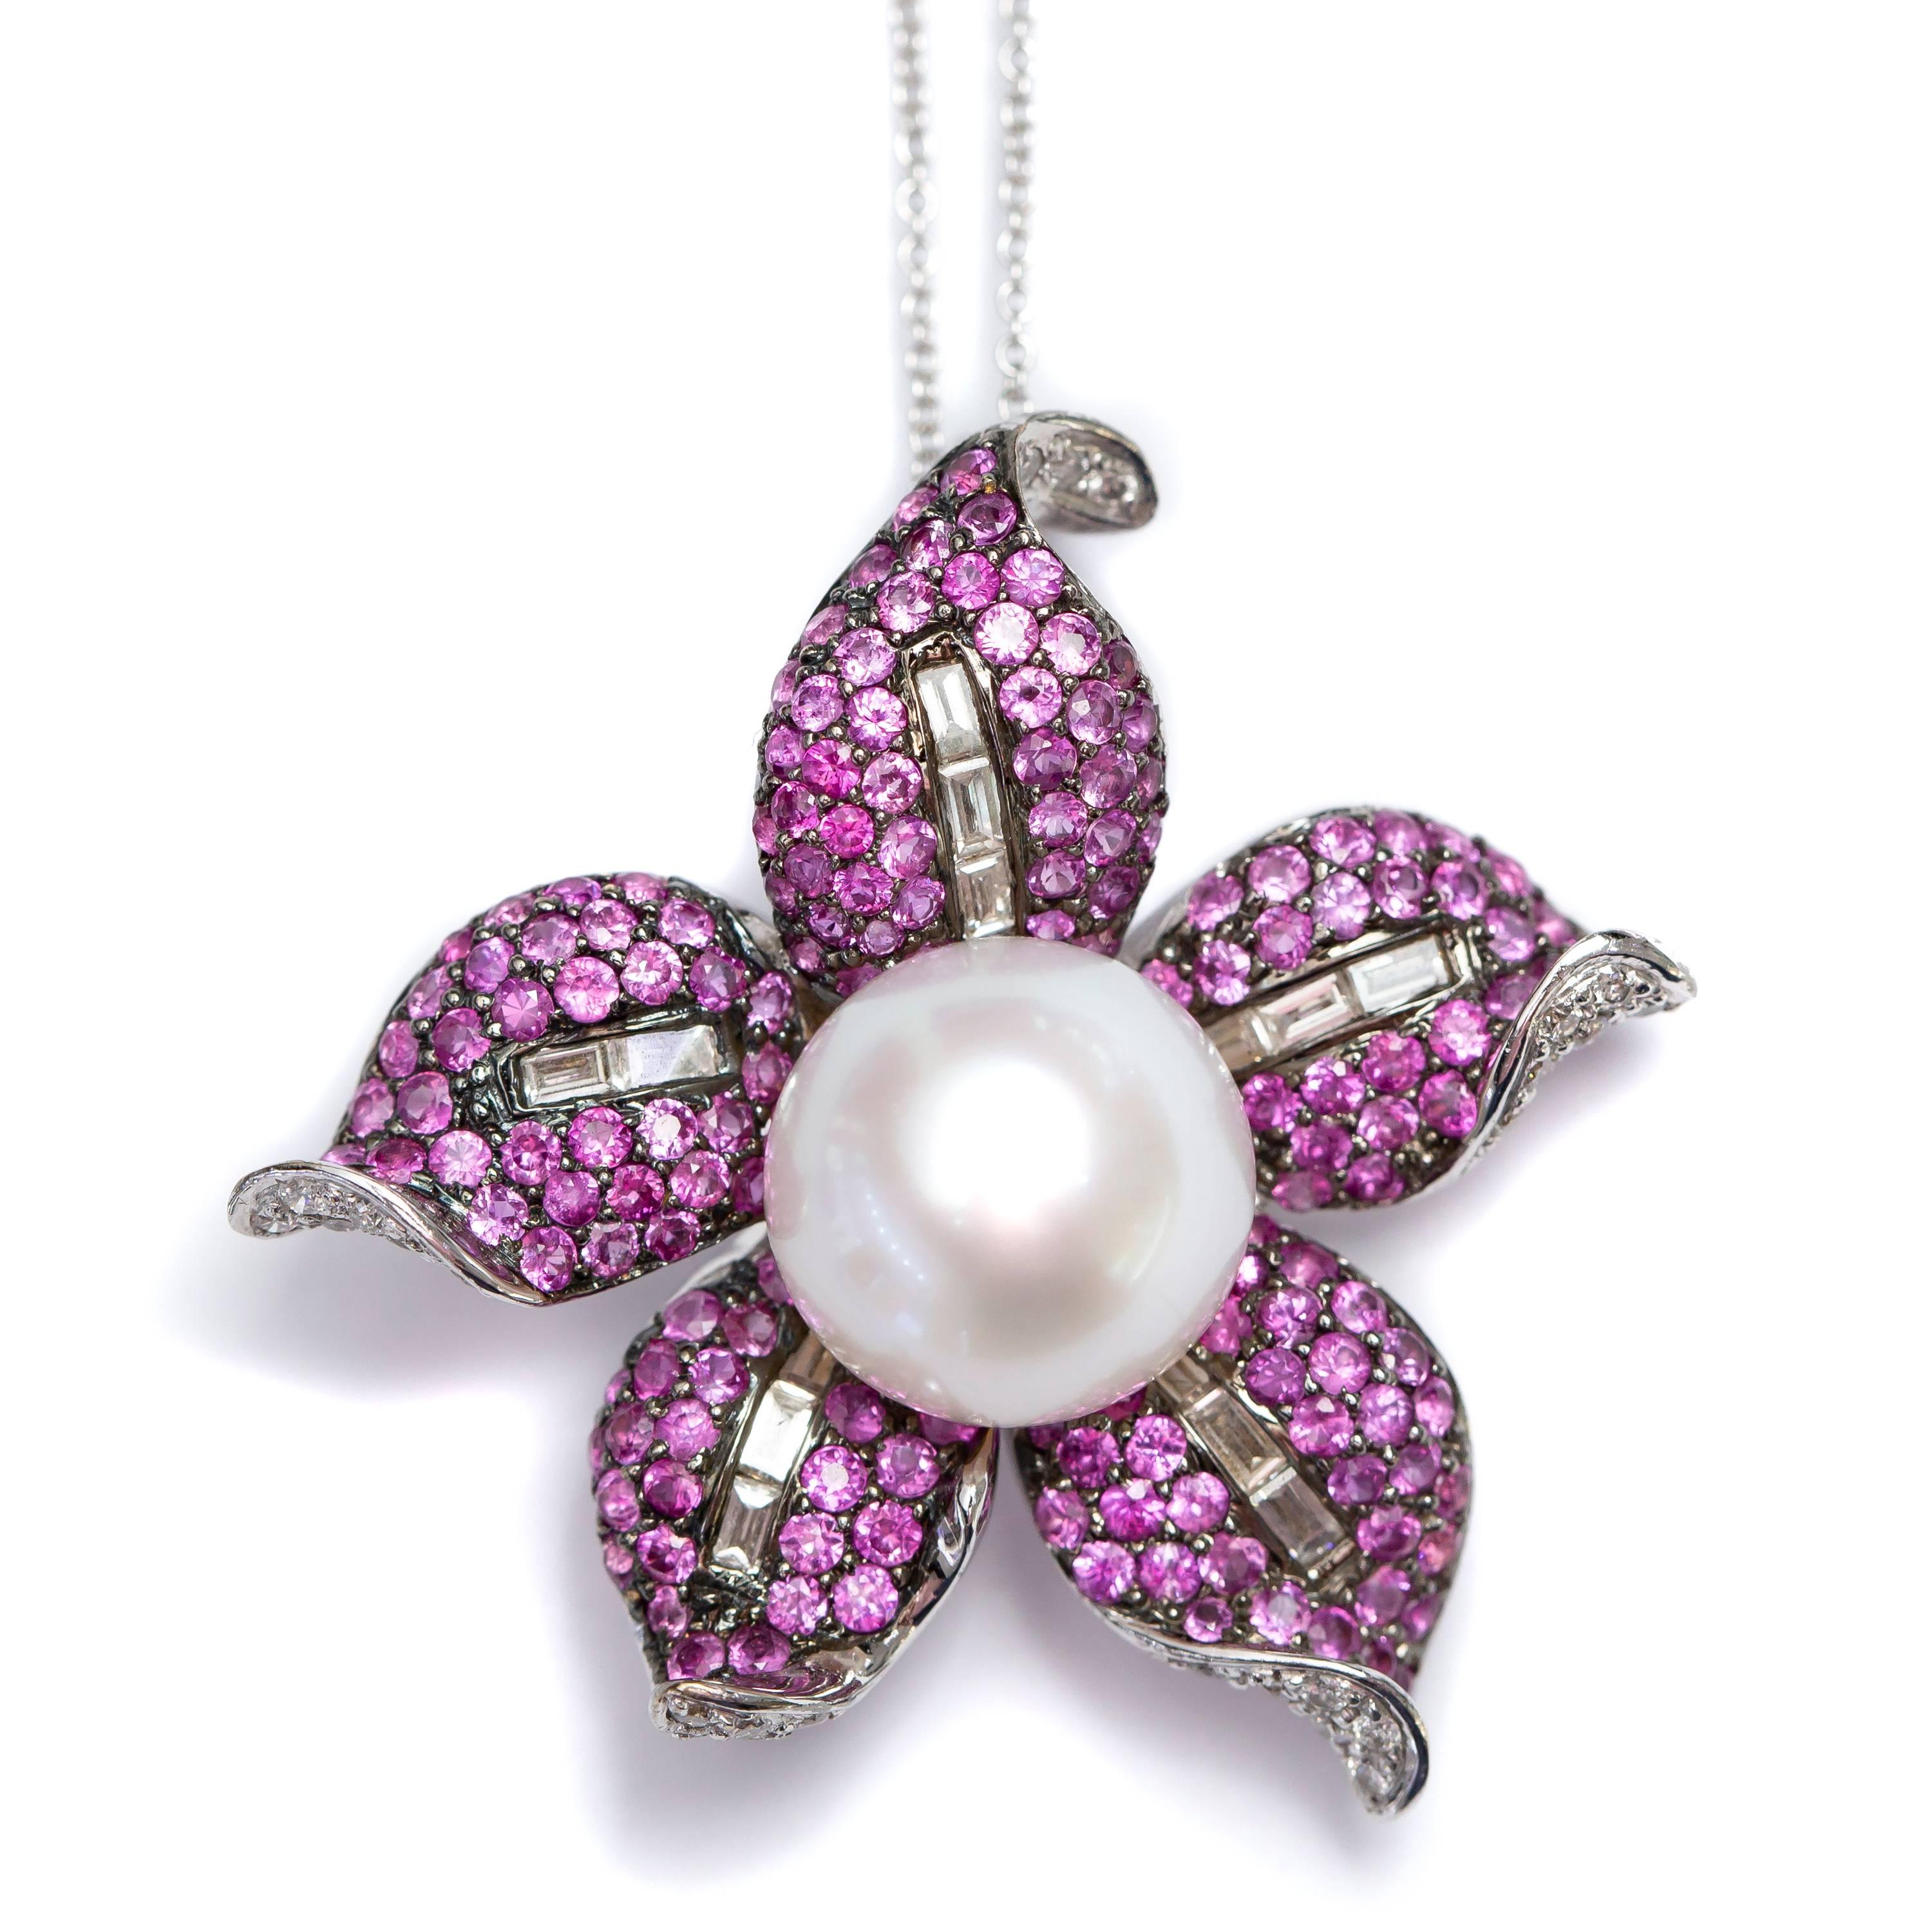 This Gorgeous 2.66 Carat Pink Sapphire Flower Shape Brooch Pendant features 0.57 Carat Color H Clarity SI1 Round and Baguette White Diamonds and a single Fresh water pearl in the center. Chain included, British Hallmarked. 